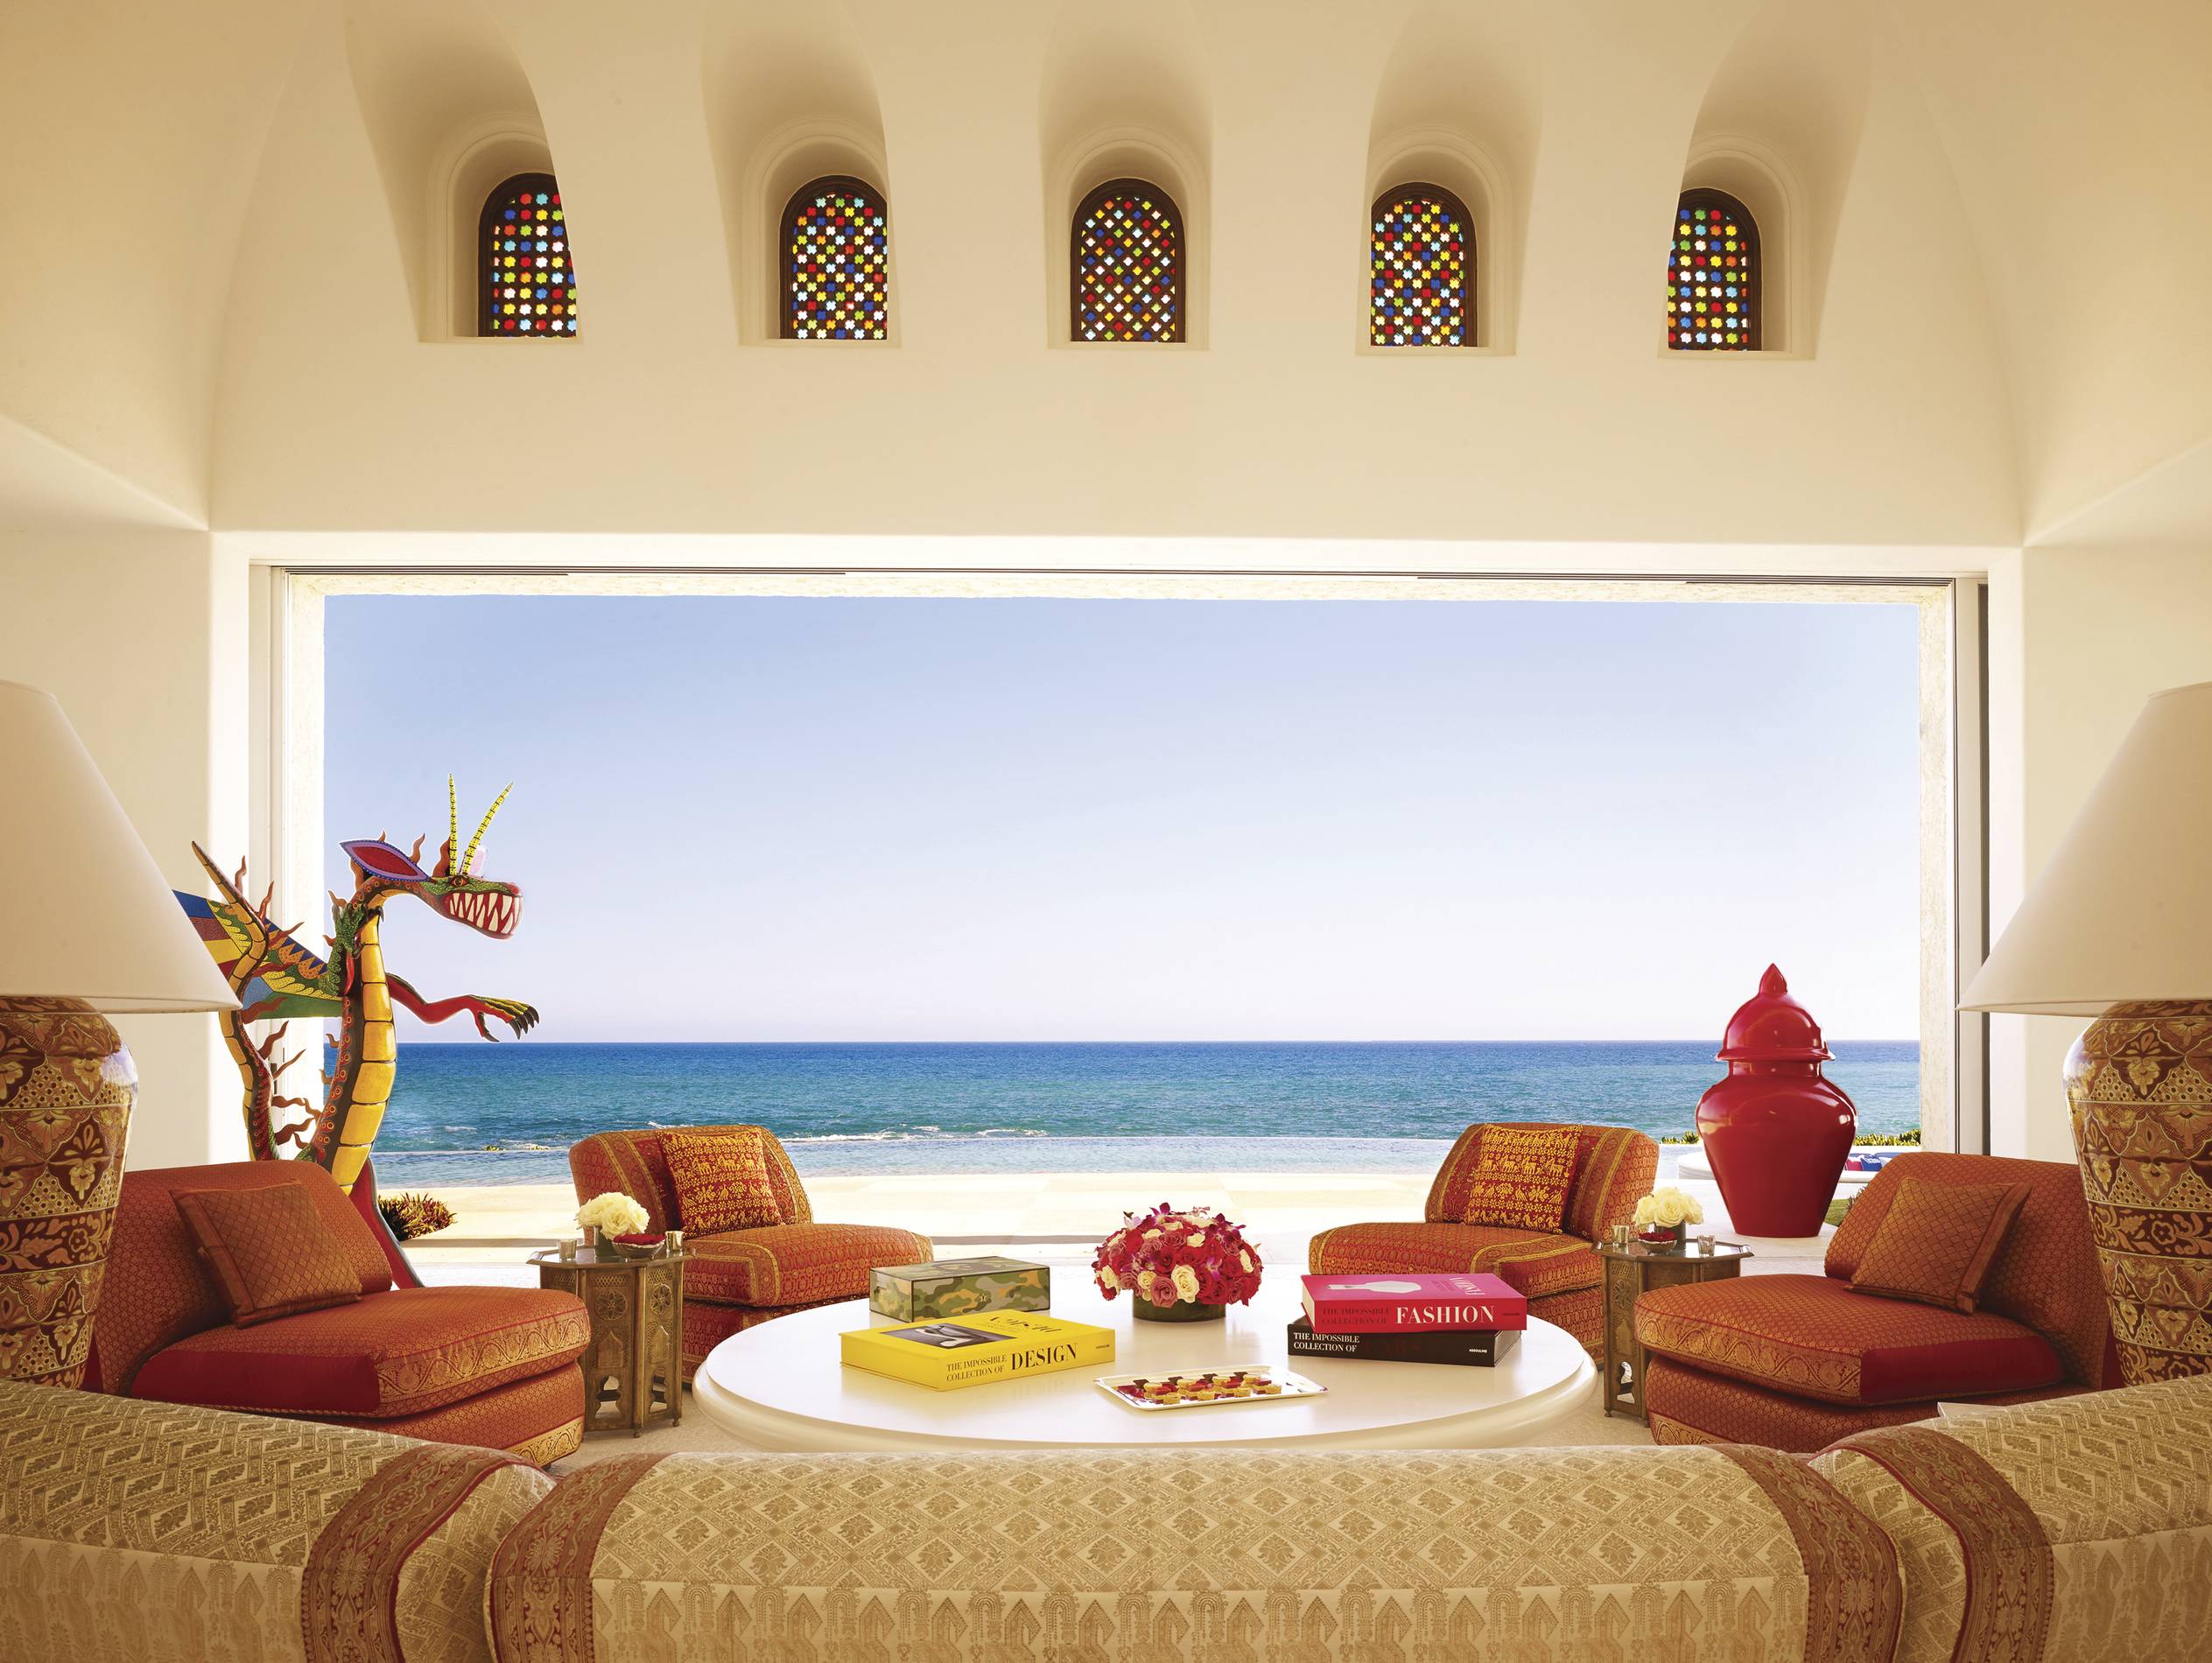 The living room of the Ty Warner Mansion emphasizes its oceanfront locale.